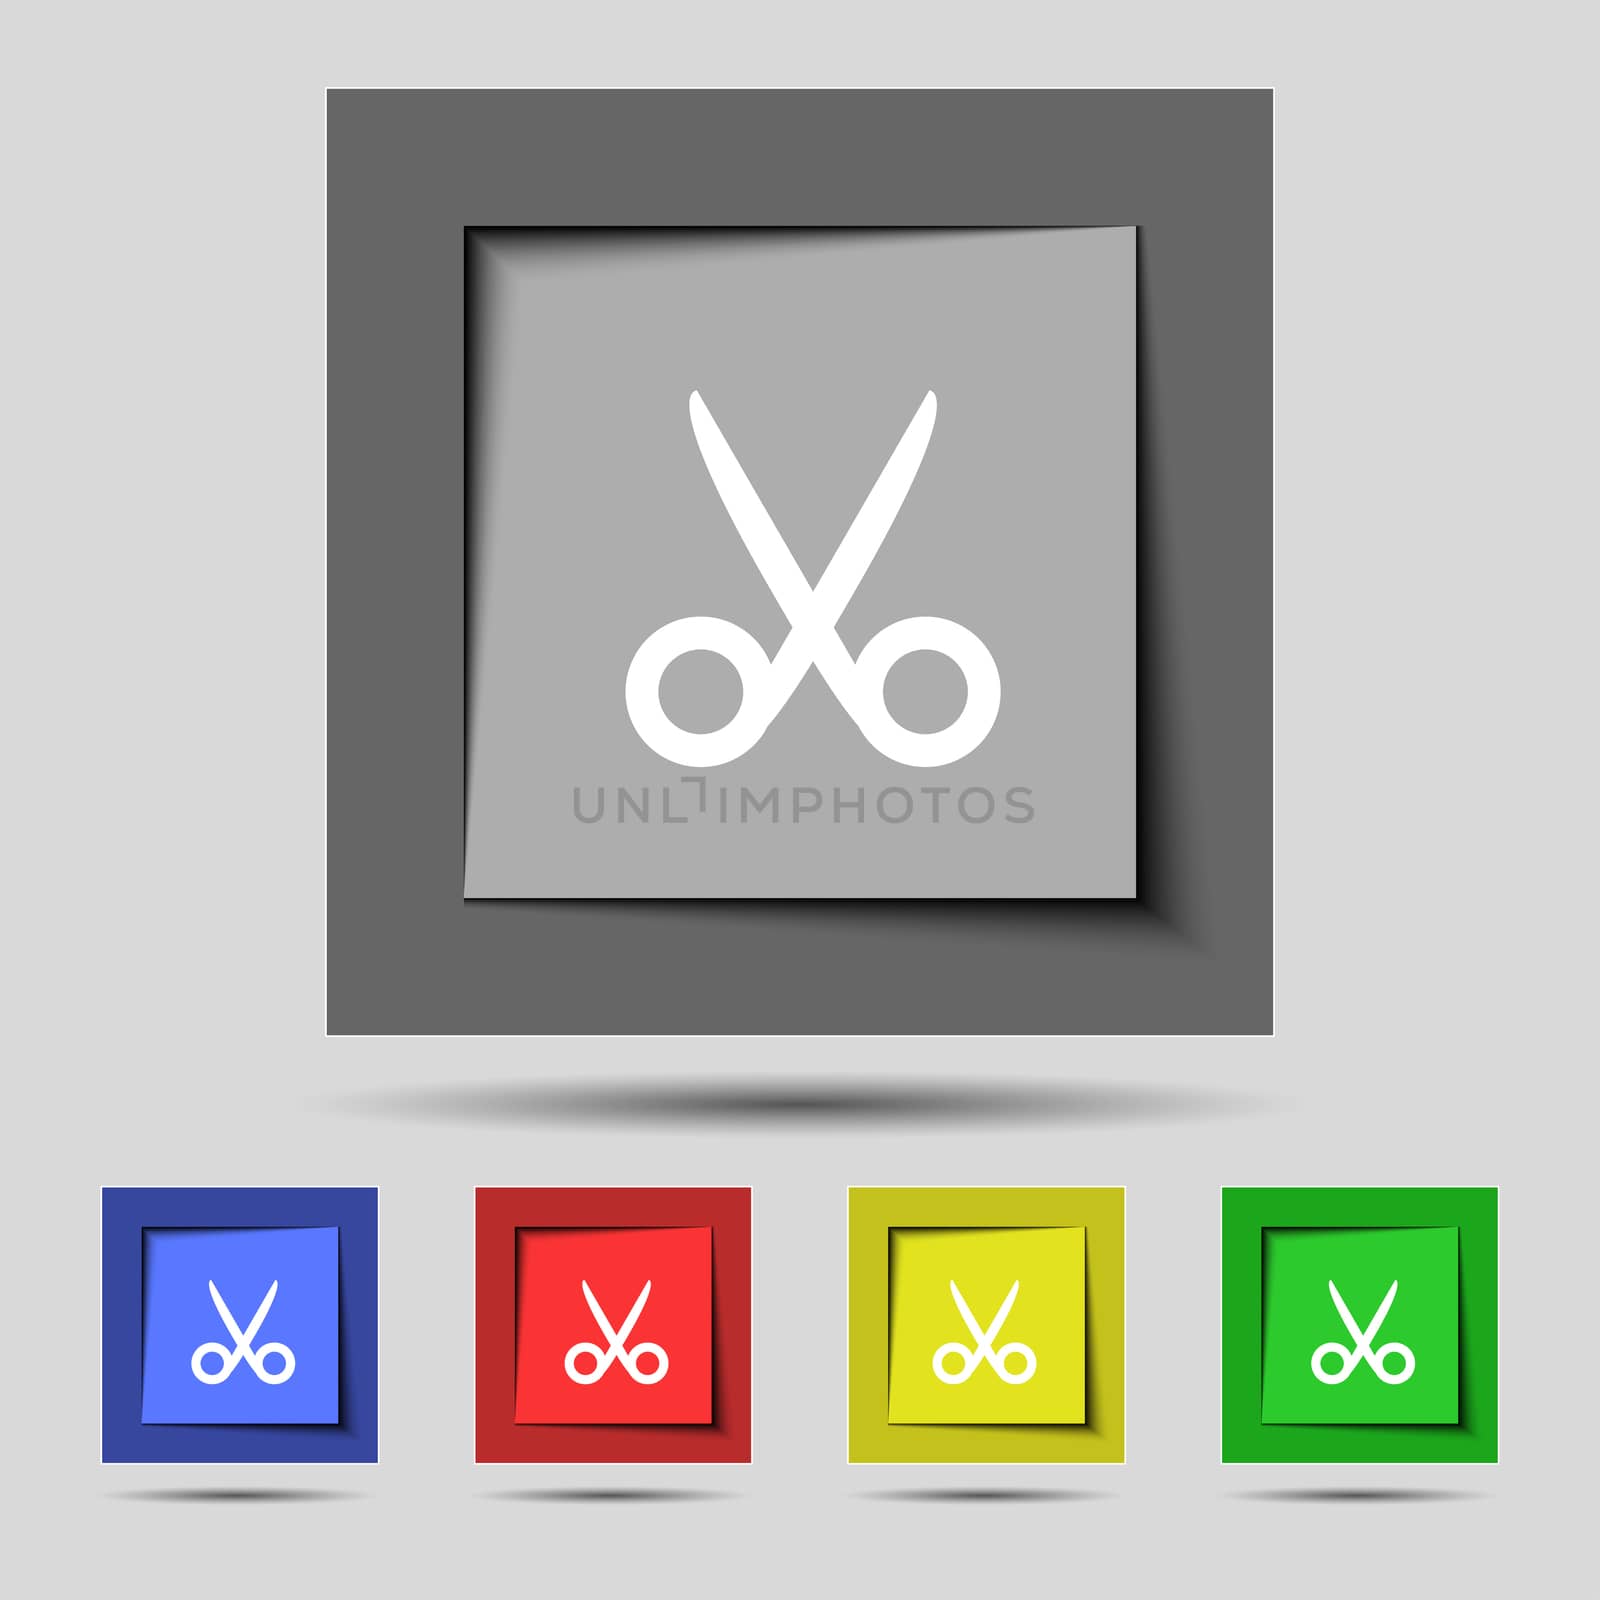 Scissors hairdresser sign icon. Tailor symbol. Set of colored buttons. illustration